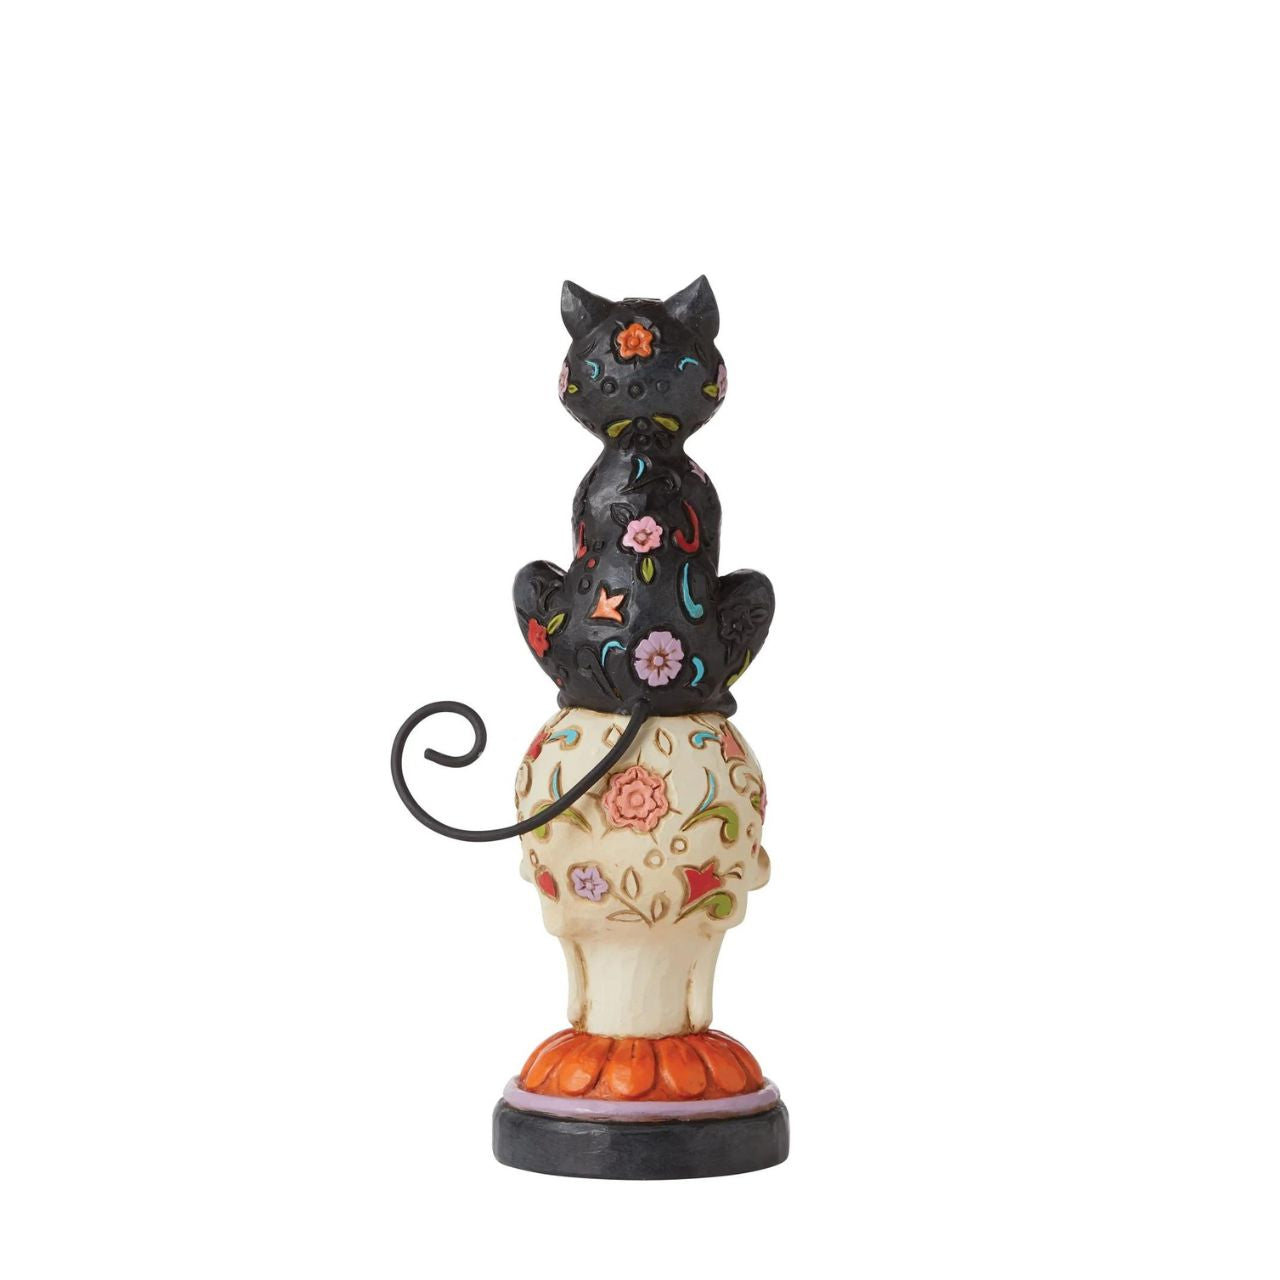 Day of the Dead Black Cat Figurine by Jim Shore  Handcrafted in breath-taking detail, this beautiful Day of the Dead Black Cat Figurine is beautifully decorated in Jim Shore's subtle combination of traditional quilt. Packaged in a branded gift box.